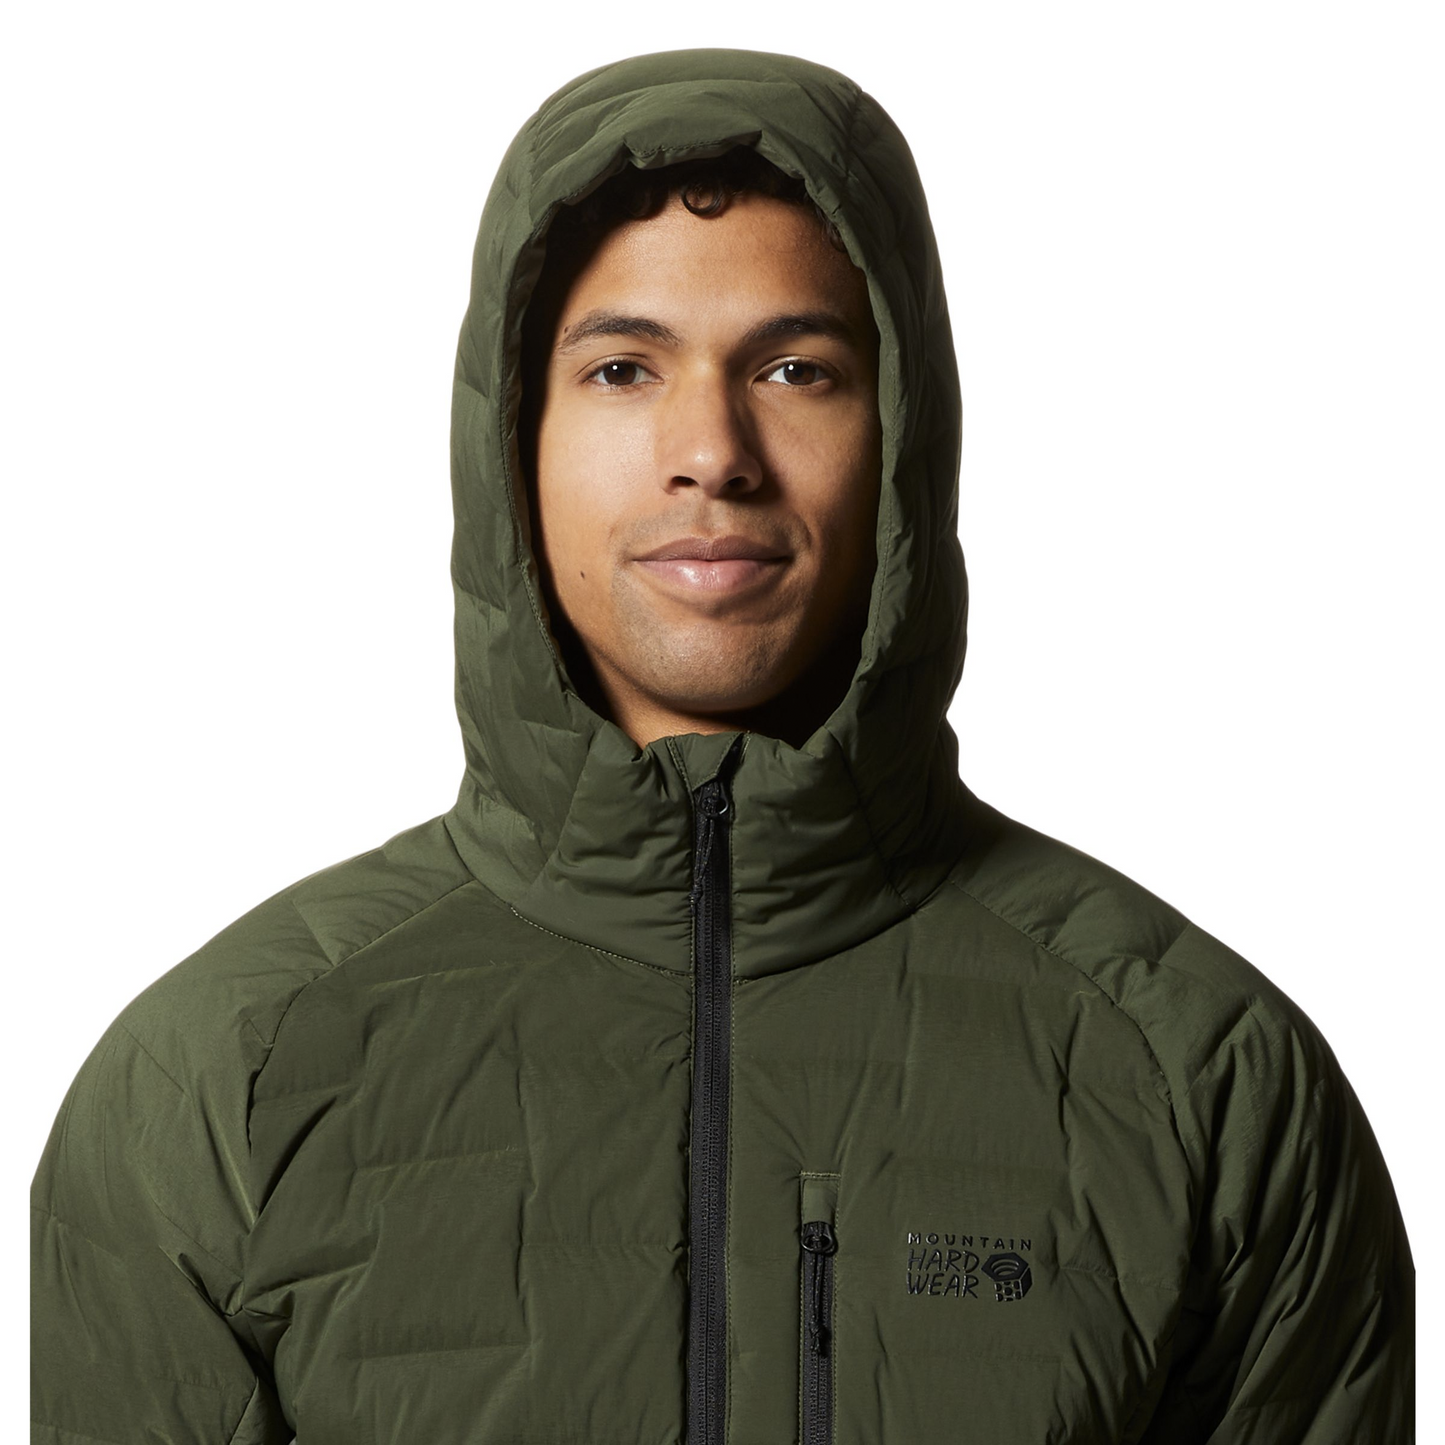 Men's Stretchdown™ Hoody Big Adventure Outfitters